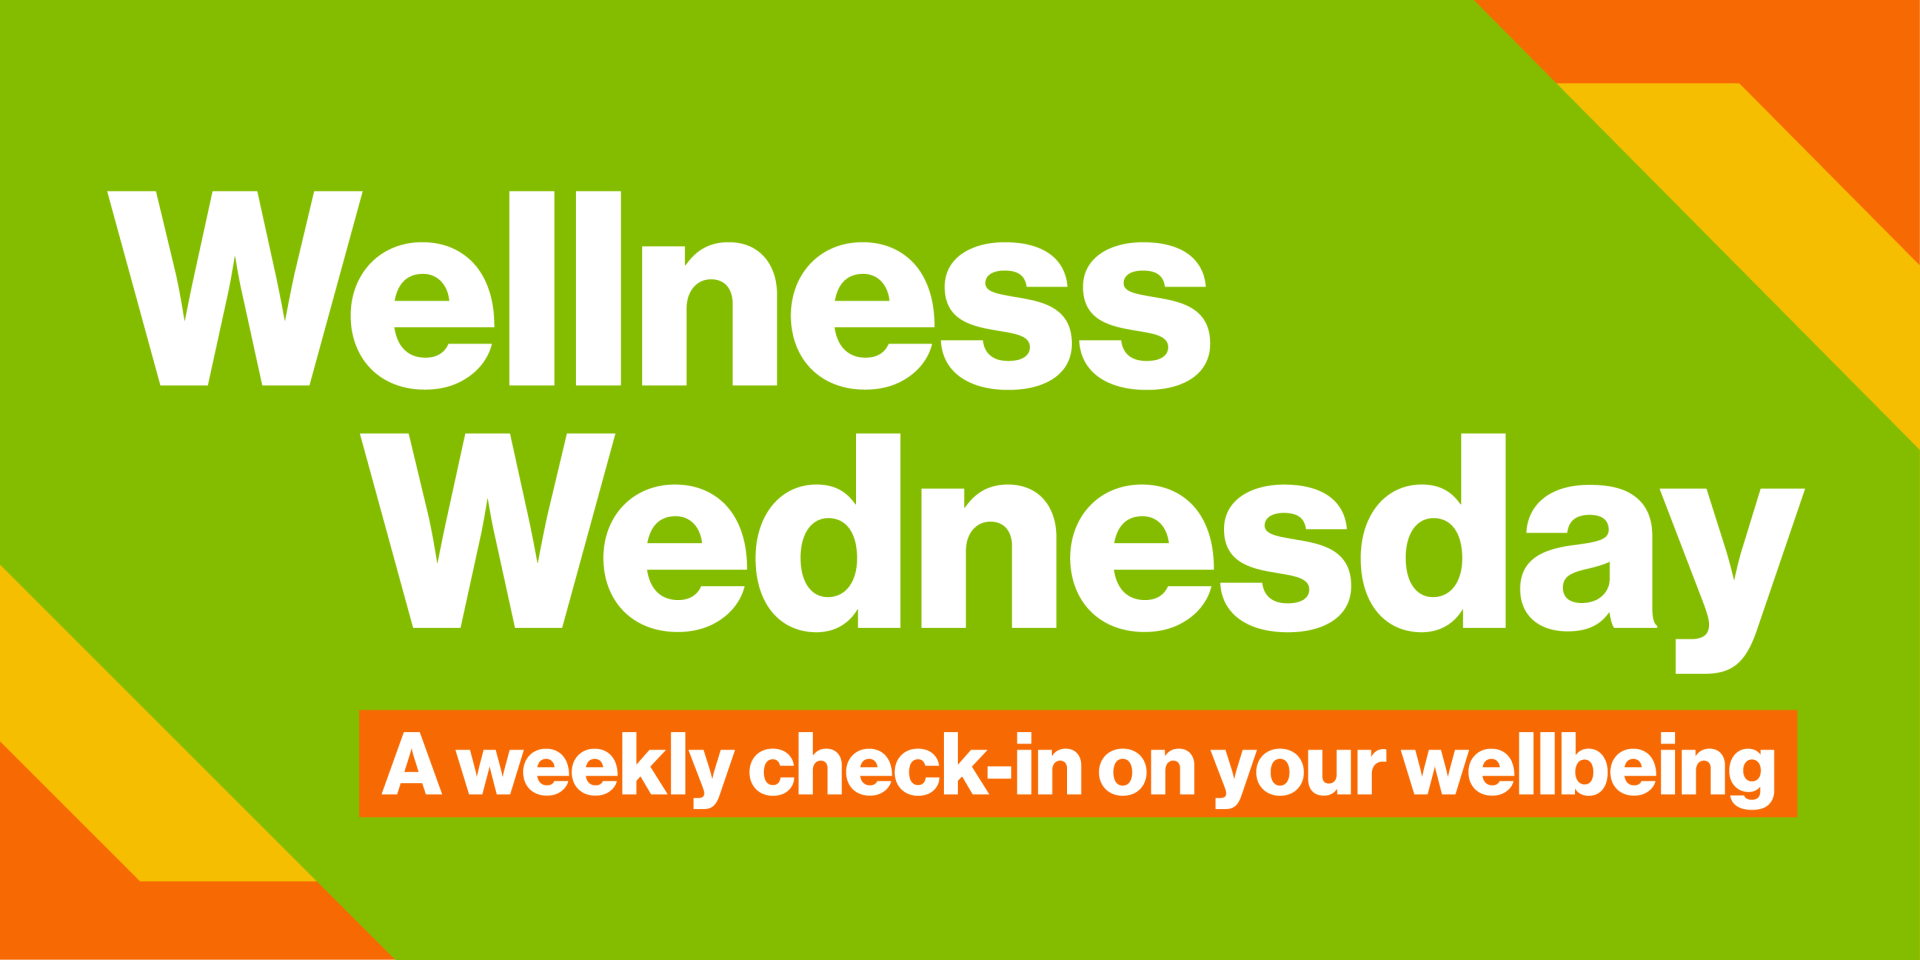 Wellness Wednesday: A weekly check-in on your wellbeing